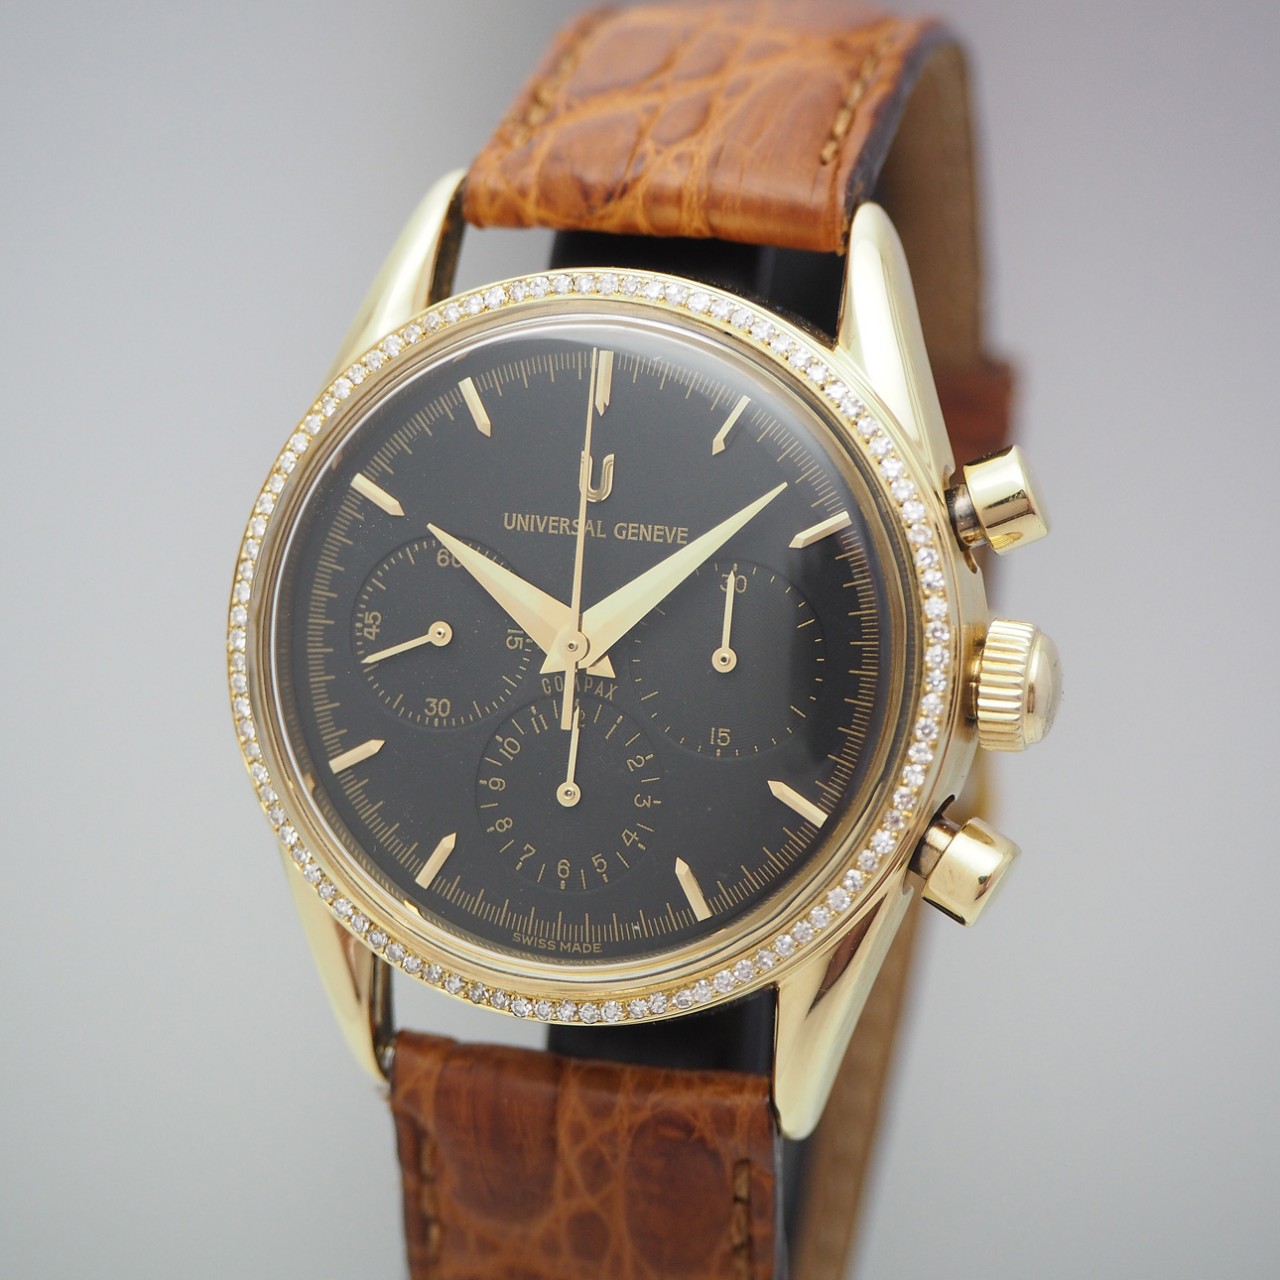 Universal Geneve Compax Chronograph, Limited -Gold 18k/750, 184.450, very rare